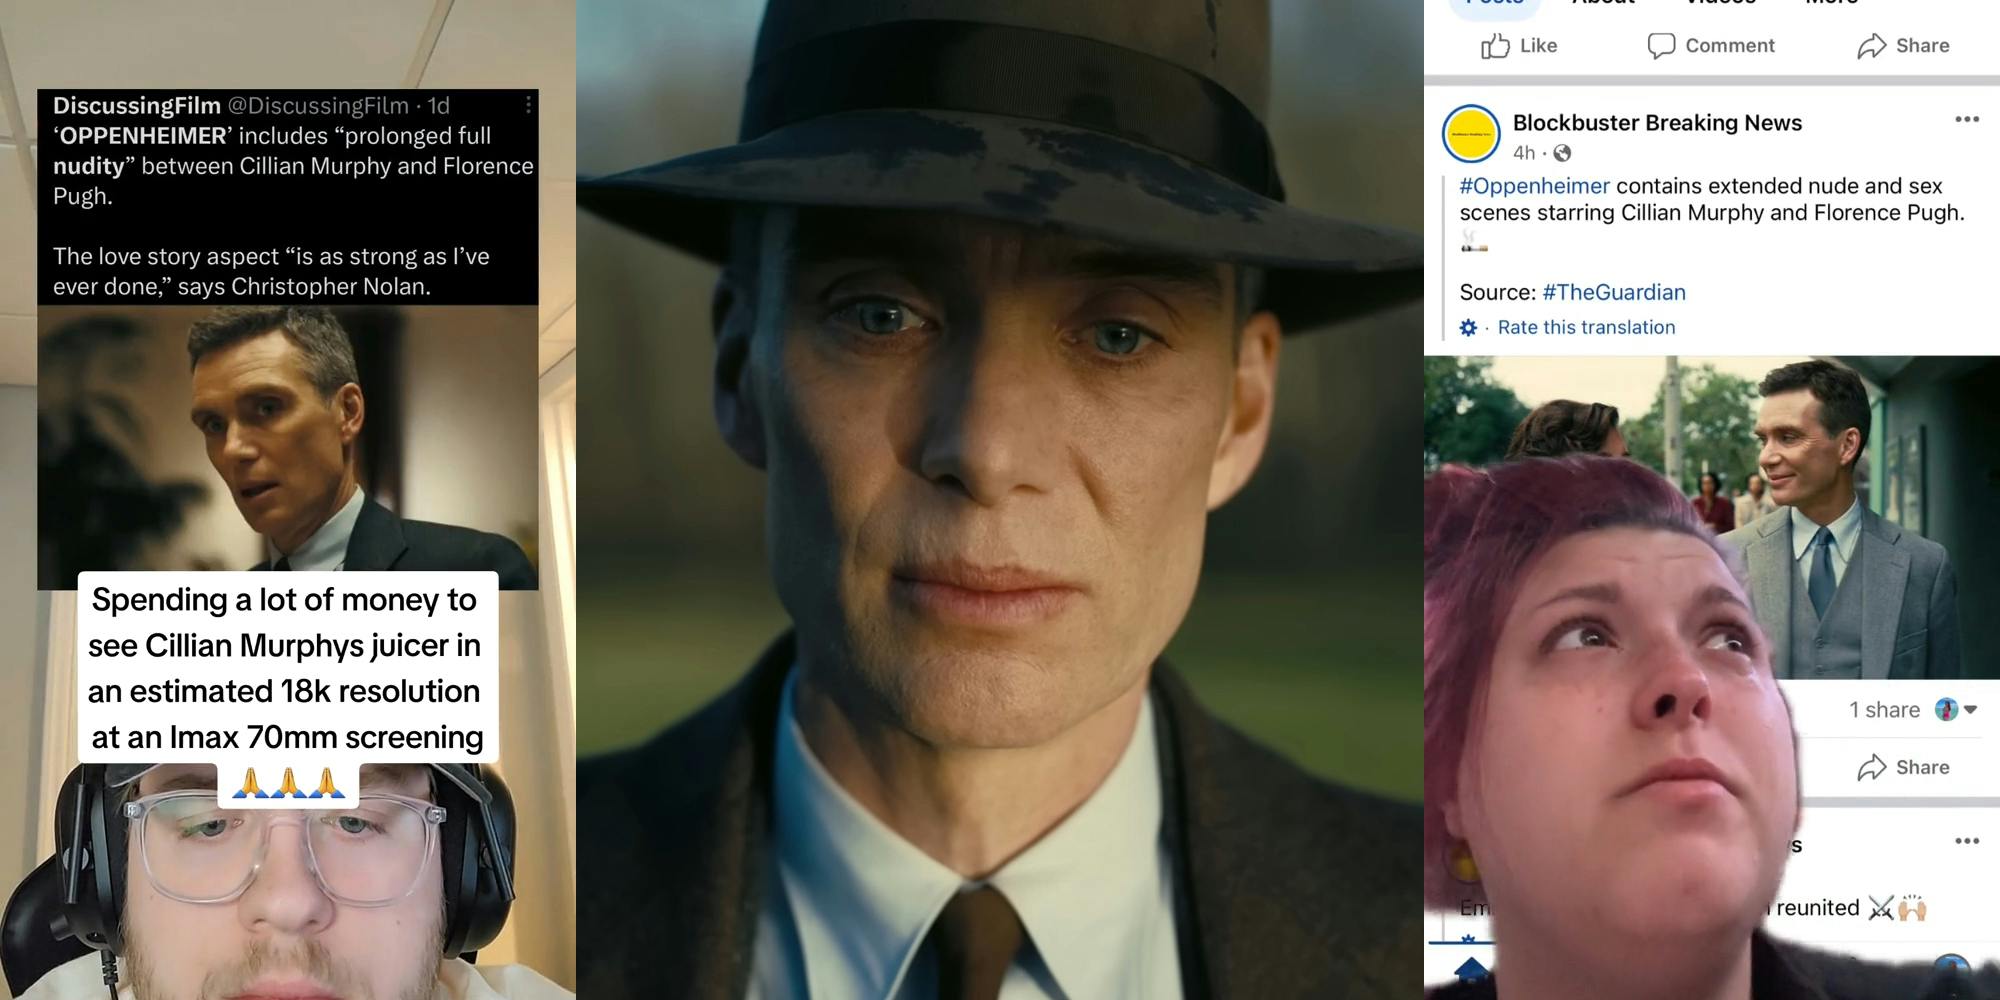 ‘Spending a lot of money to see Cillian Murphys juicer in an estimated 18k resolution’: FilmTok is freaking out over ‘Oppenheimer’s R-rated sex scene